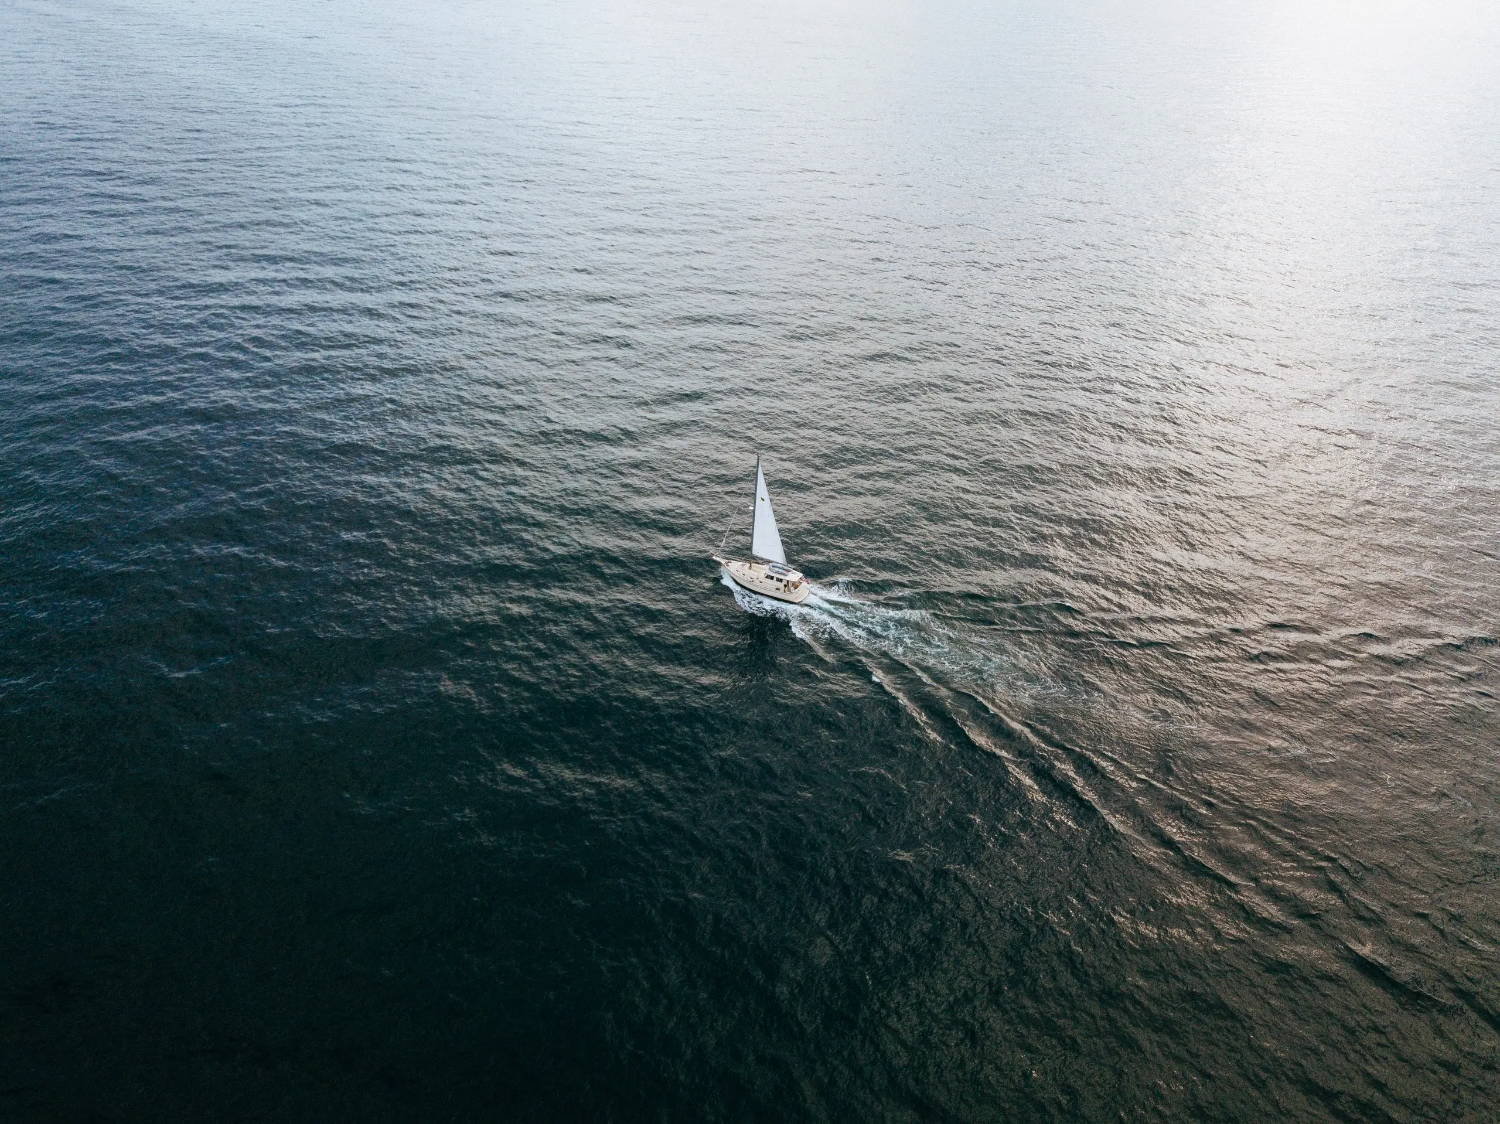 Overhead shot of a sailboat on the ocean